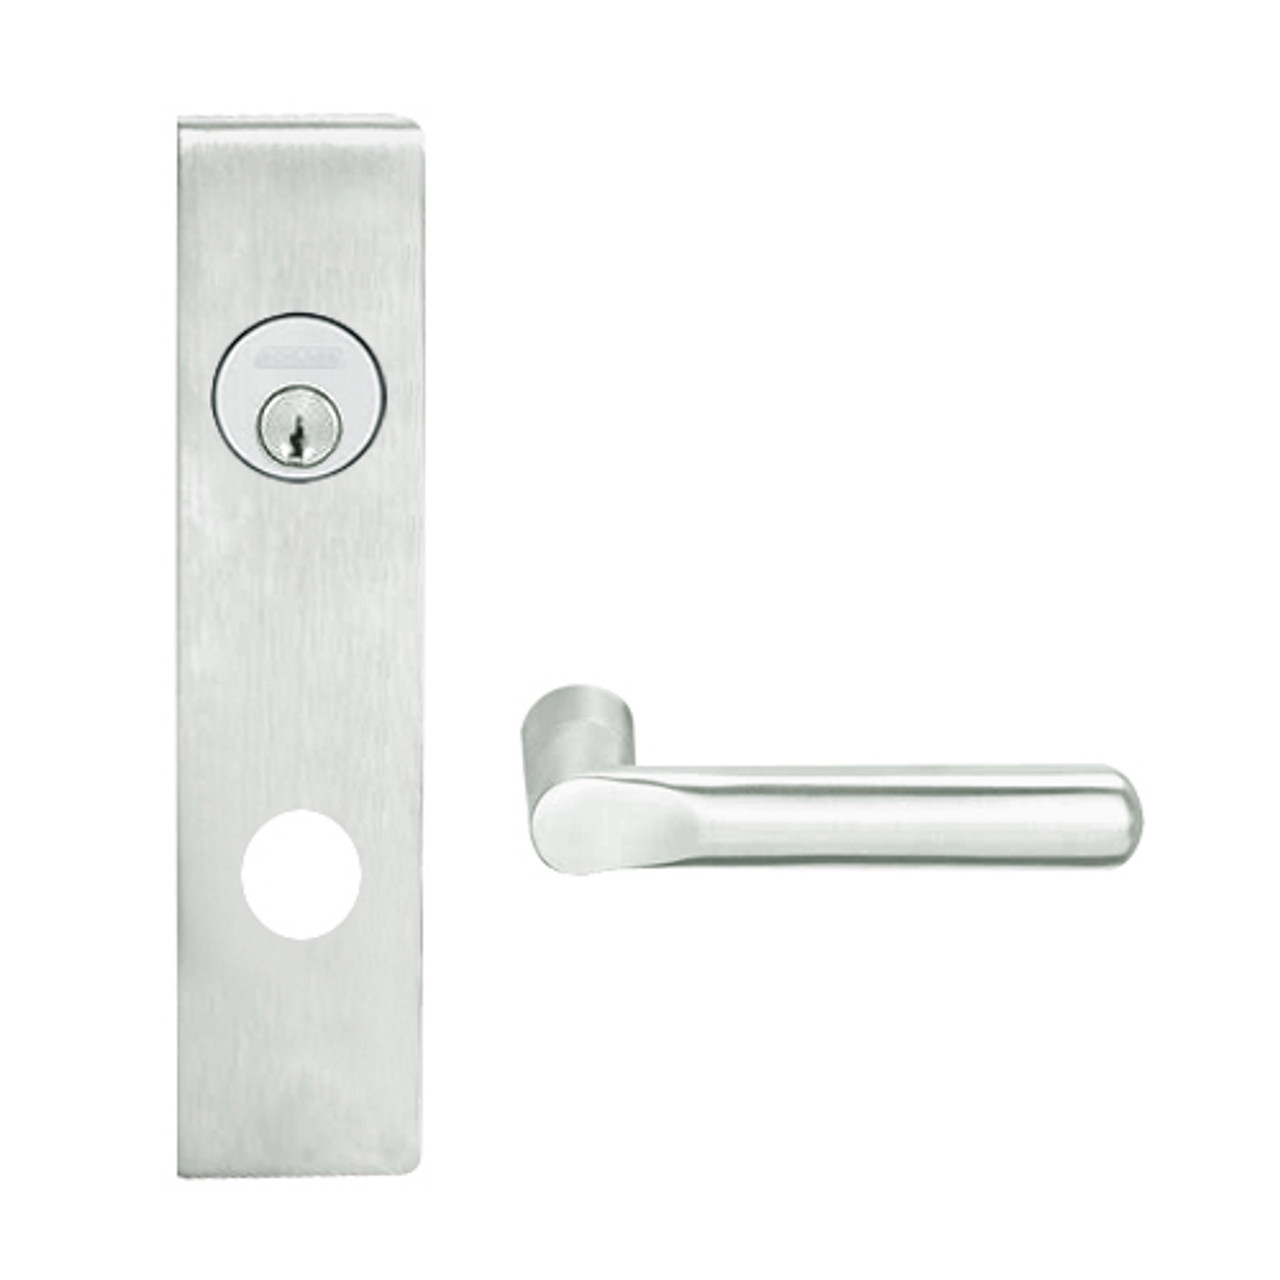 L9050P-18L-619 Schlage L Series Entrance Commercial Mortise Lock with 18 Cast Lever Design in Satin Nickel